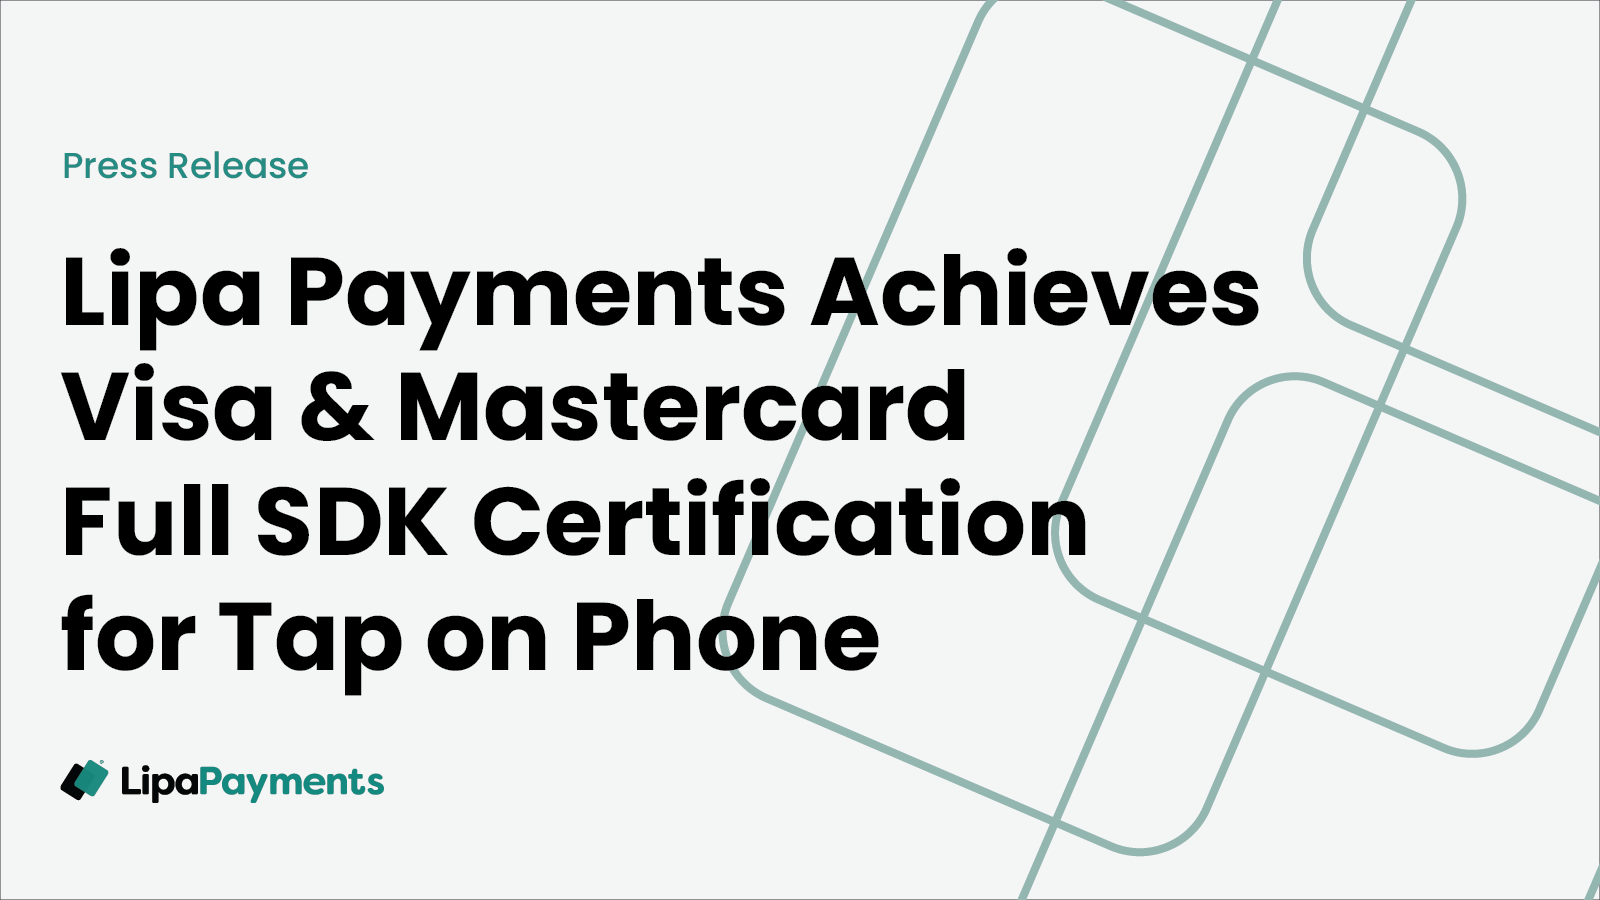 Lipa Payments Achieves Visa & Mastercard Full SDK Certification for Tap to Phone